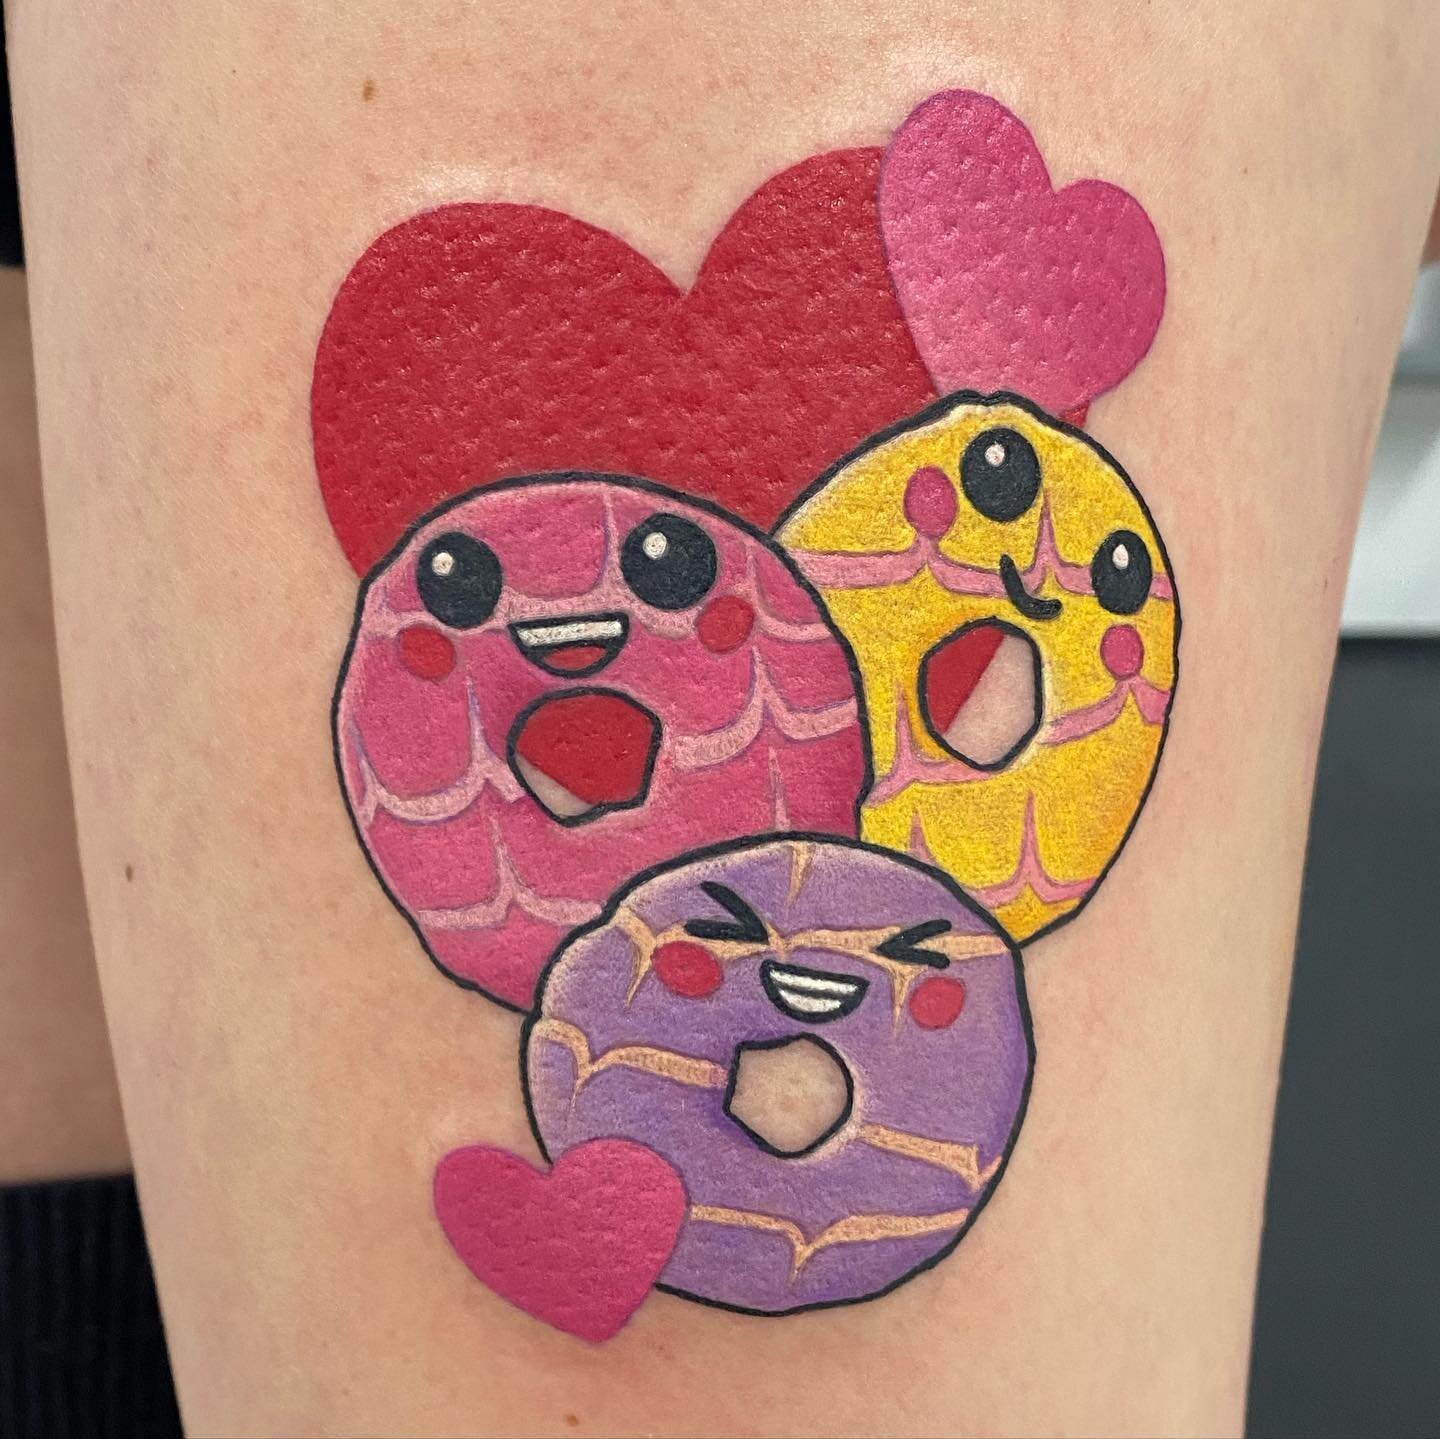 Thanks Michelle! 😊
Party Rings, a vegan favourite, apparently we made this back in February&hellip;
Some fun to brake up the flowers 🥳

Made with @fusion_ink and @killerinktattoo supplies in #edinburgh 

#partyring #partyrings #theveganfavourite #v